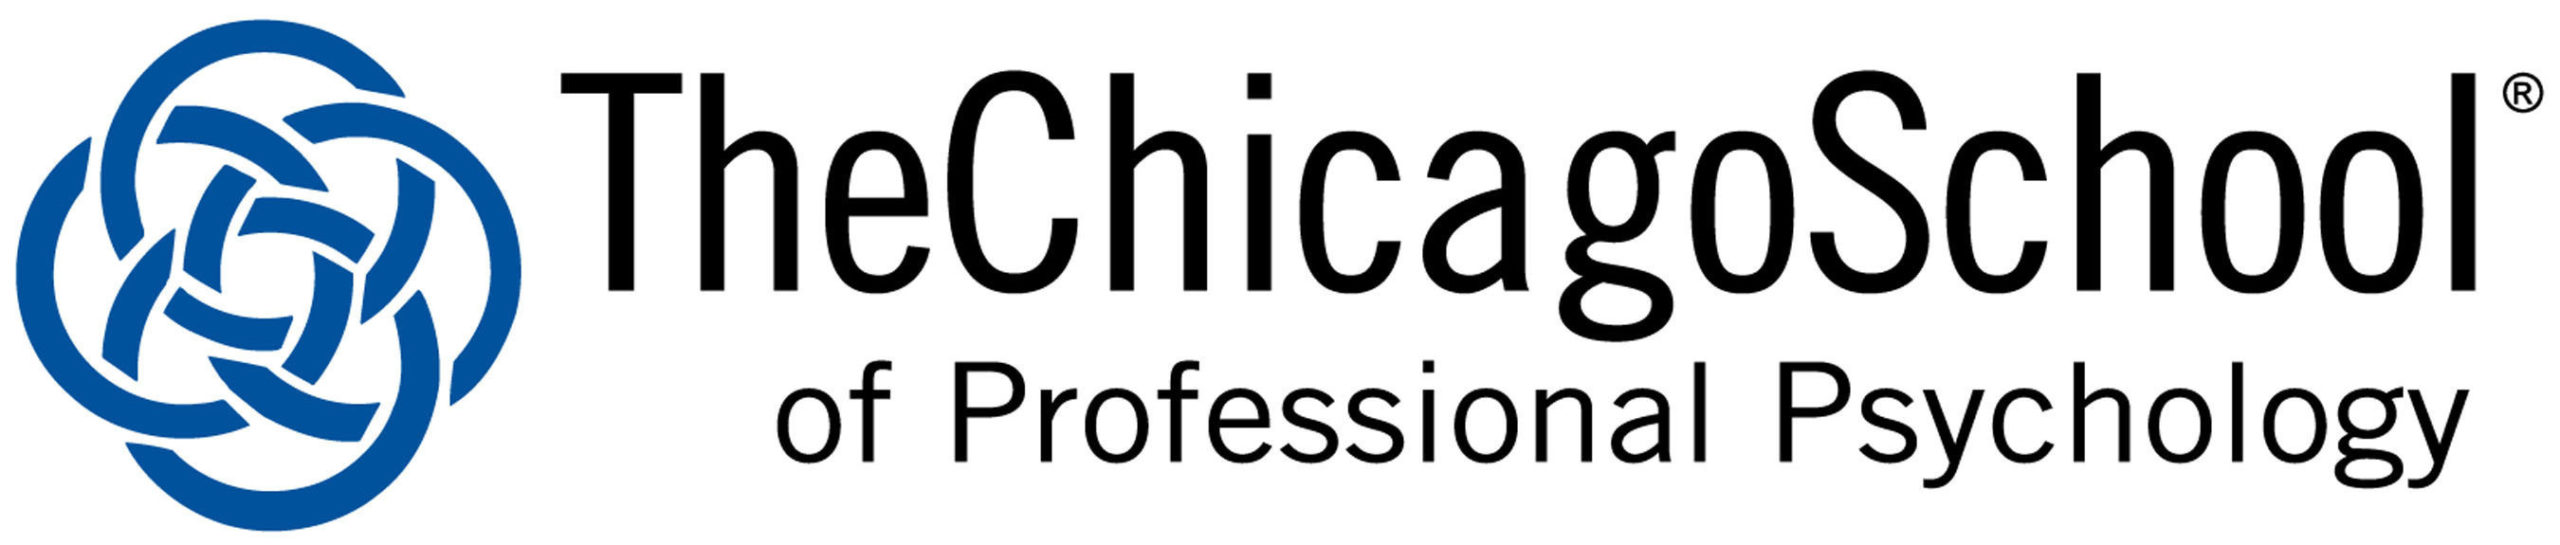 The Chicago School of Professional Psychology best applied behavior analysis masters programs online